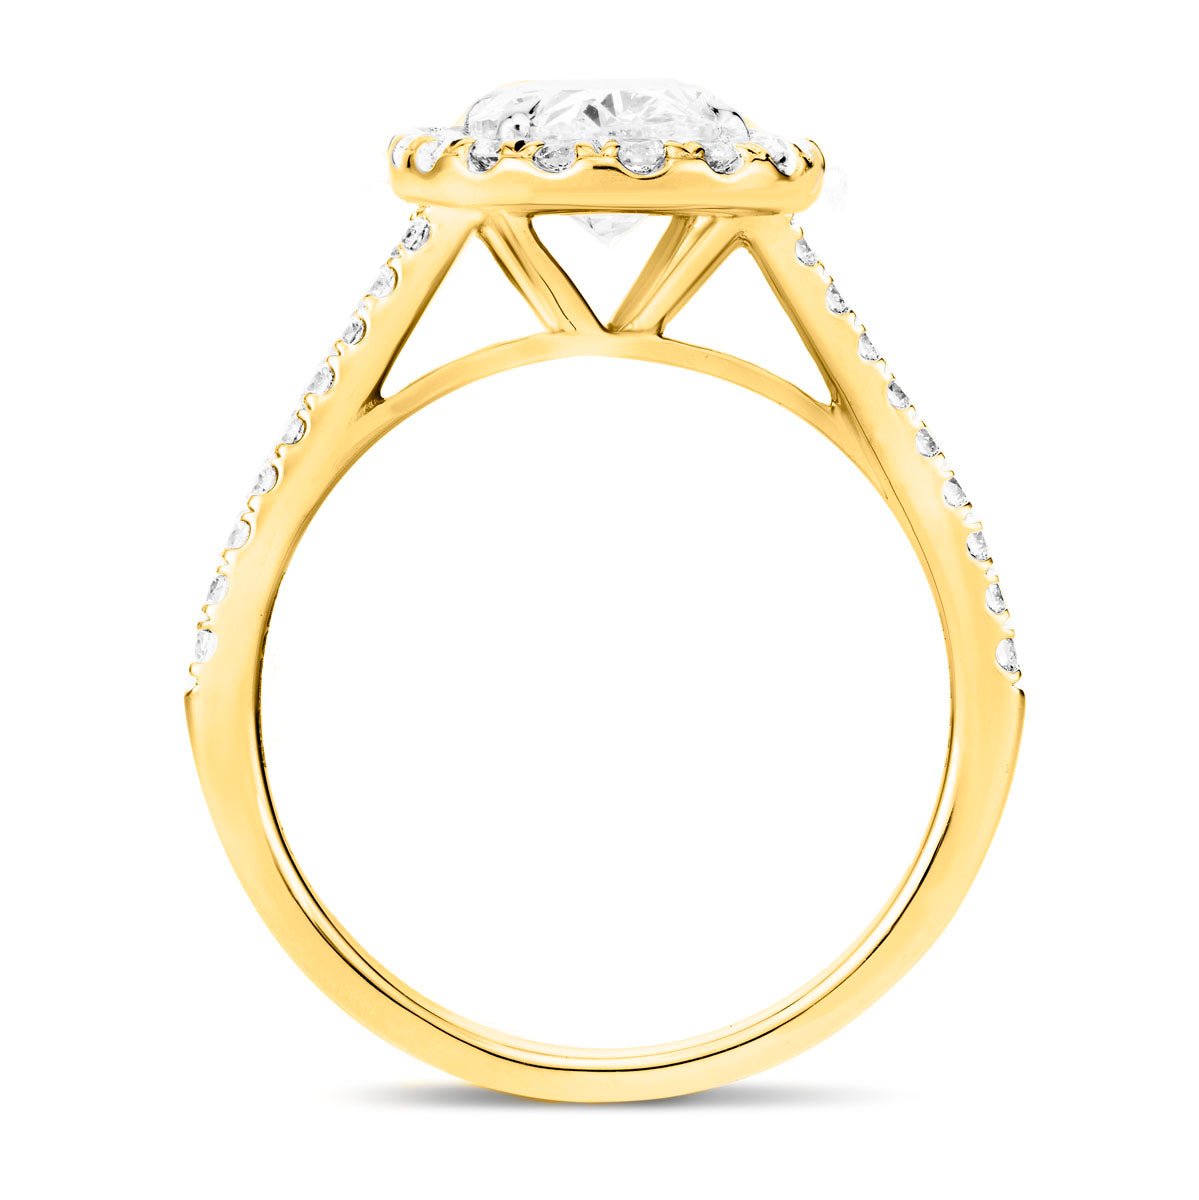 Certified Twist Oval Diamond Halo Engagement Ring 2.10ct G/SI in 18k Yellow Gold - All Diamond